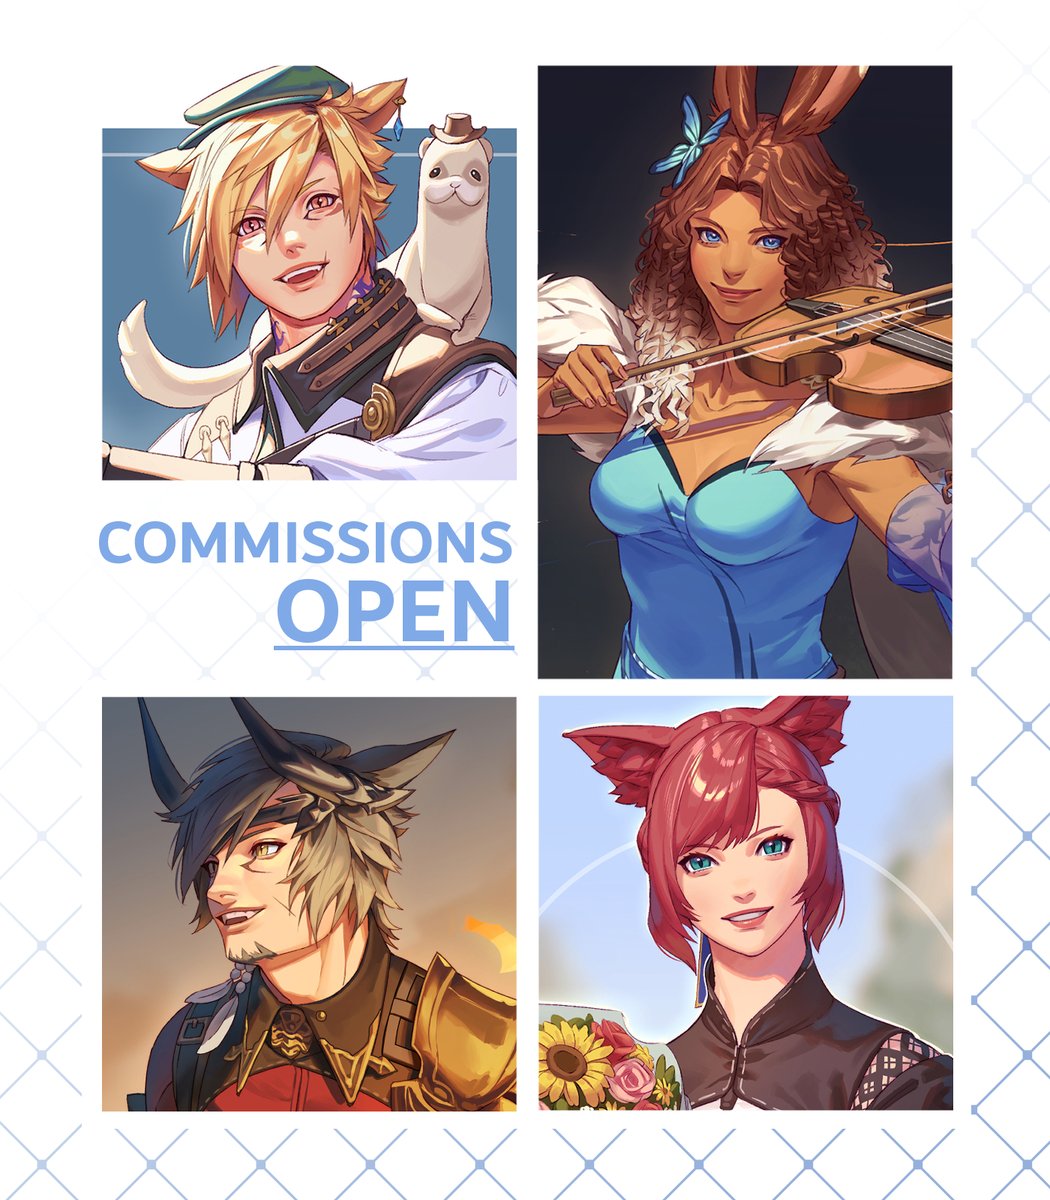 (RTs appreciated! ☺) 💙 My commissions are open!! 💙 For more info regarding price and how to order, please visit: mellalyss-comms.carrd.co